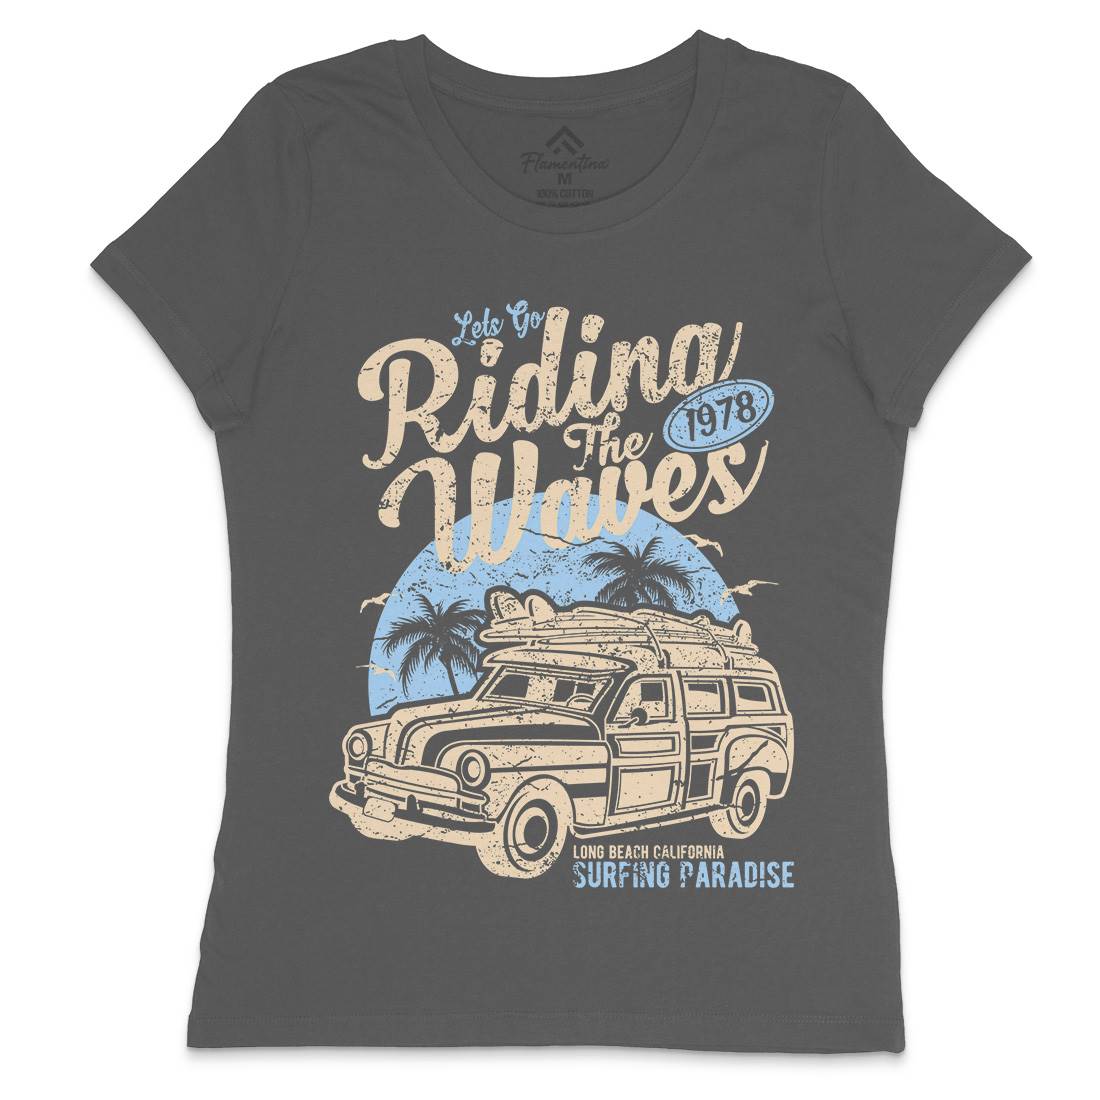 Riding The Waves Womens Crew Neck T-Shirt Surf A122